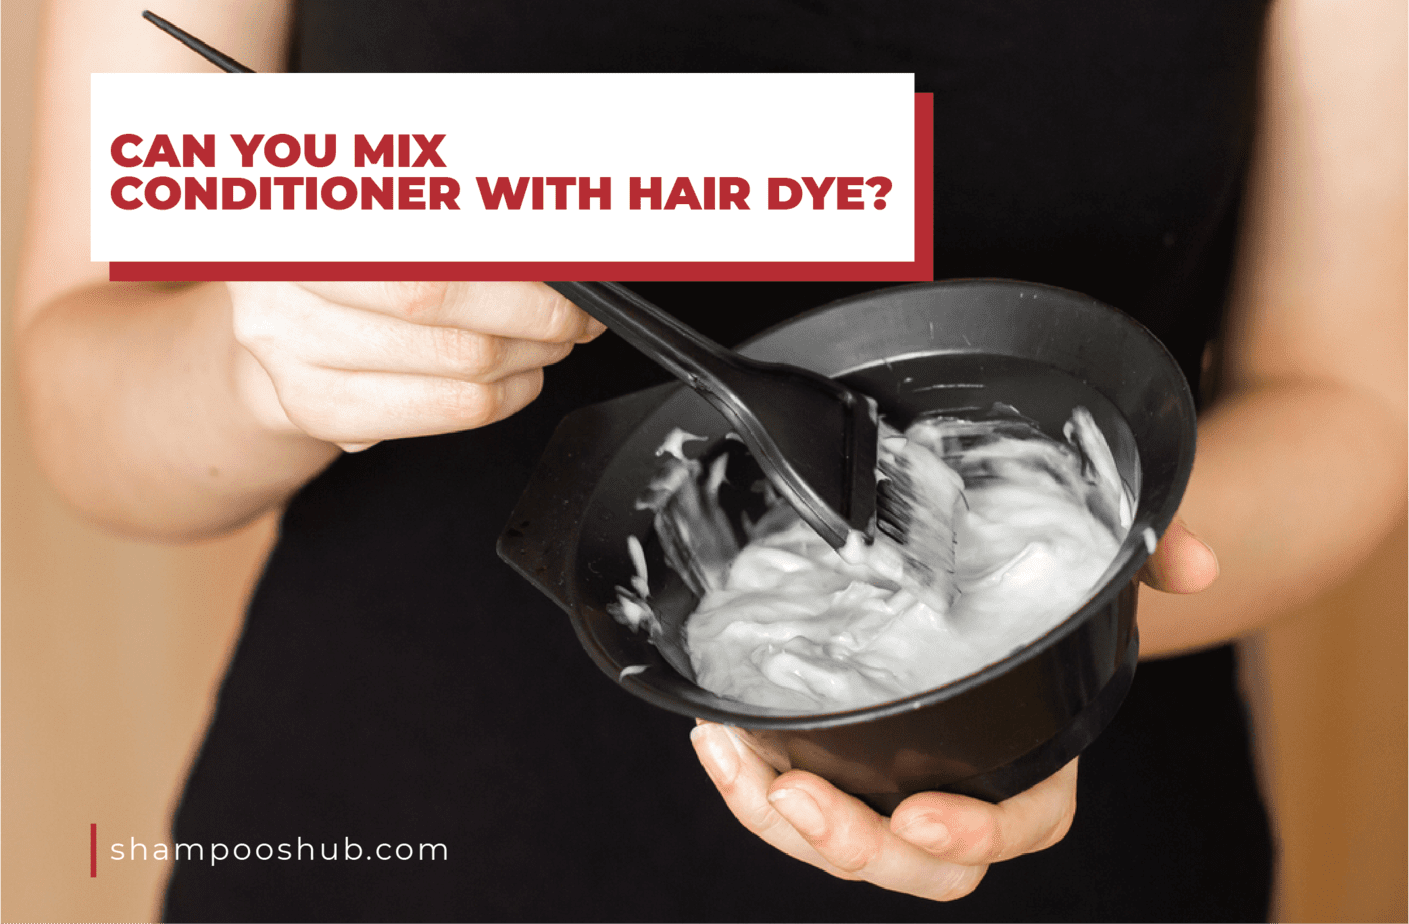 Can You Mix Conditioner with Hair Dye?